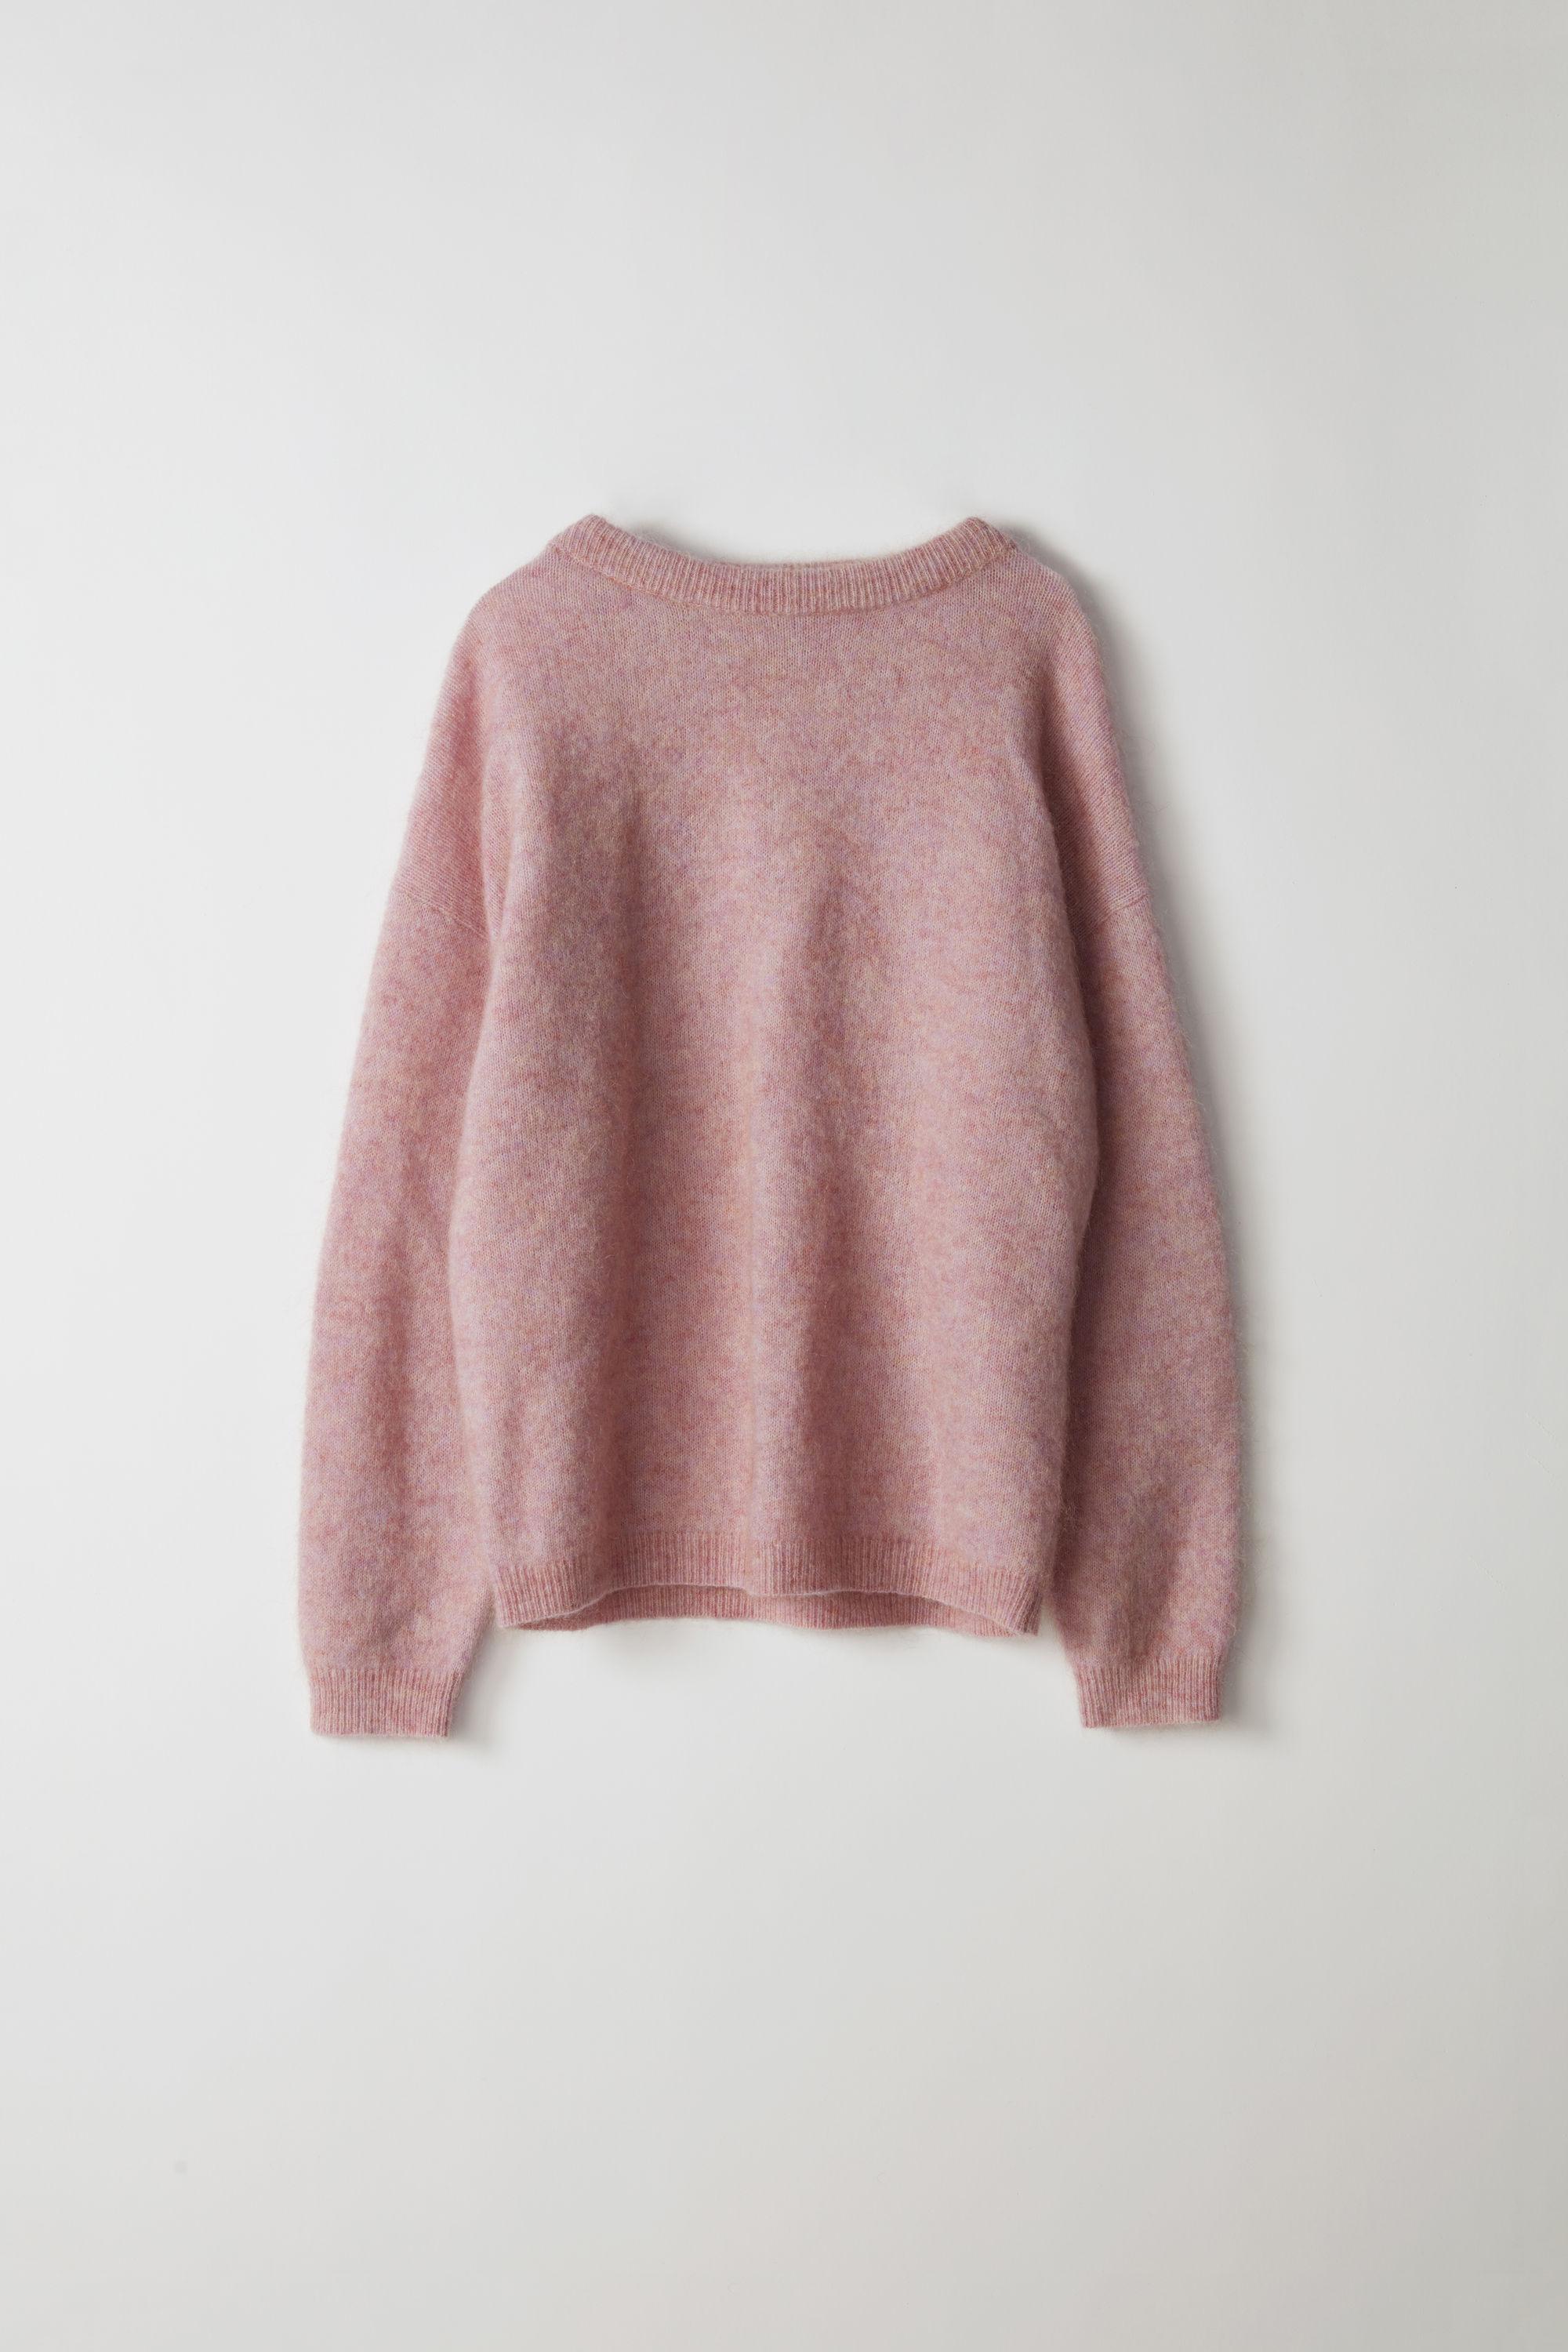 Acne Studios Wool Dramatic Mohair Dusty Pink Oversized Sweater - Lyst